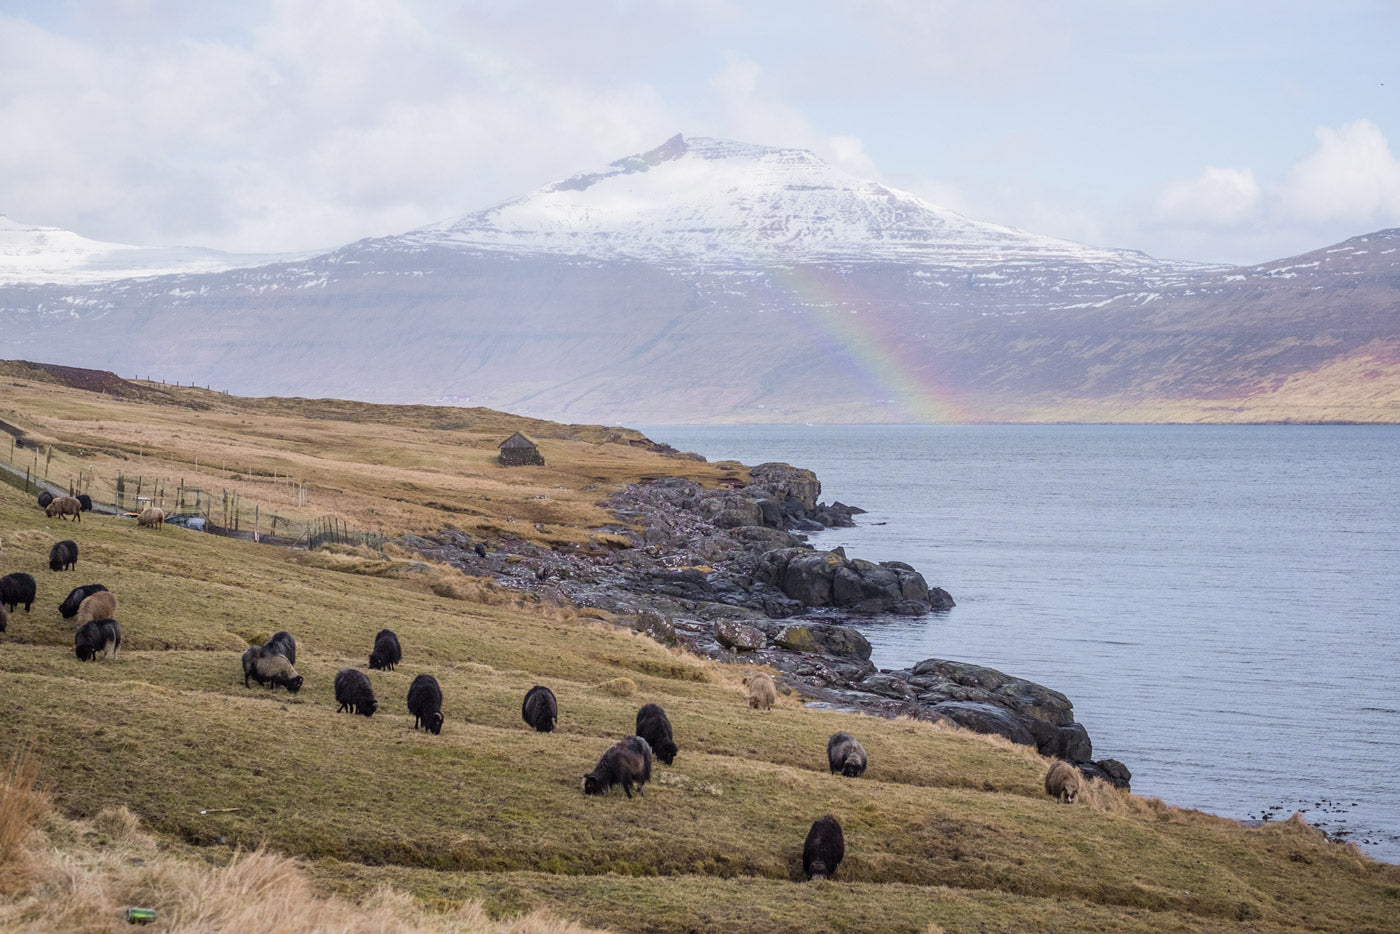 Faroe landscape speckled with sheep